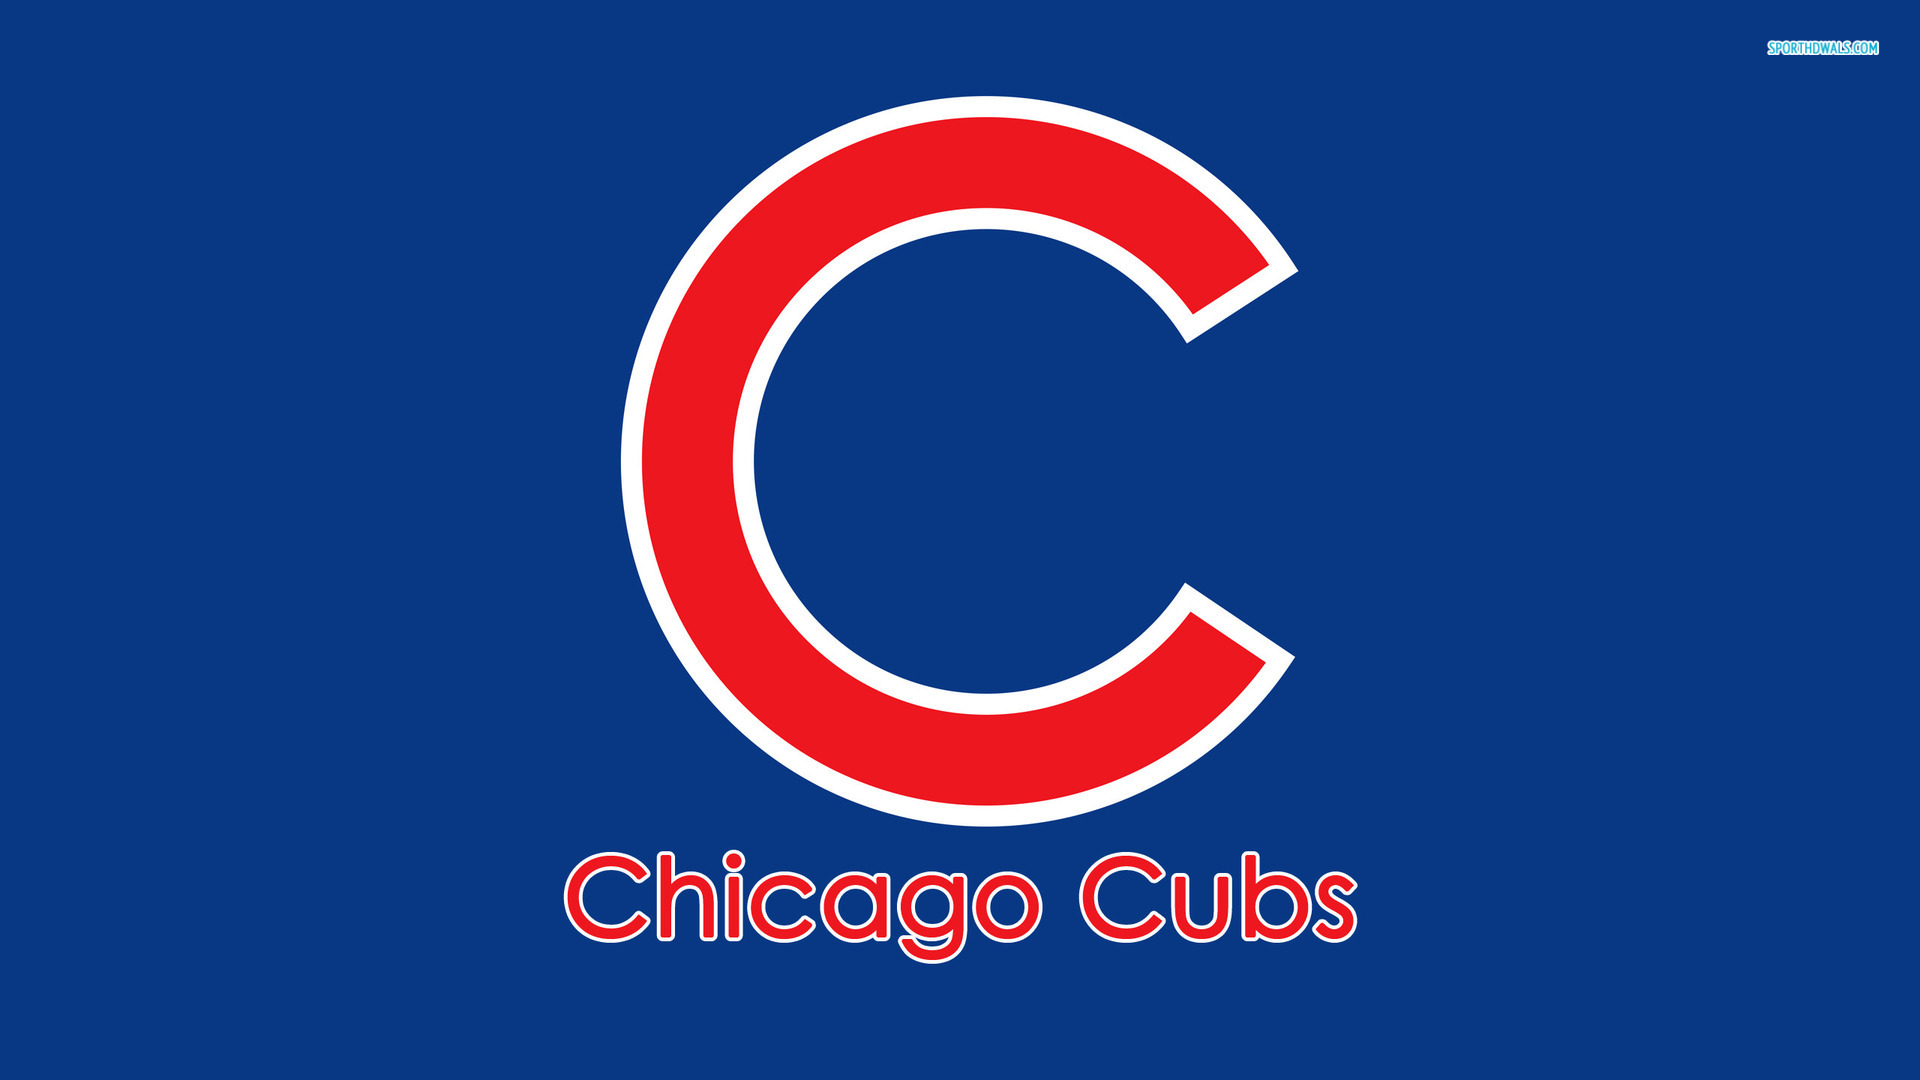 Chicago Cubs Best Wallpapers 24341 Images | Largepict. - Cliparts.co